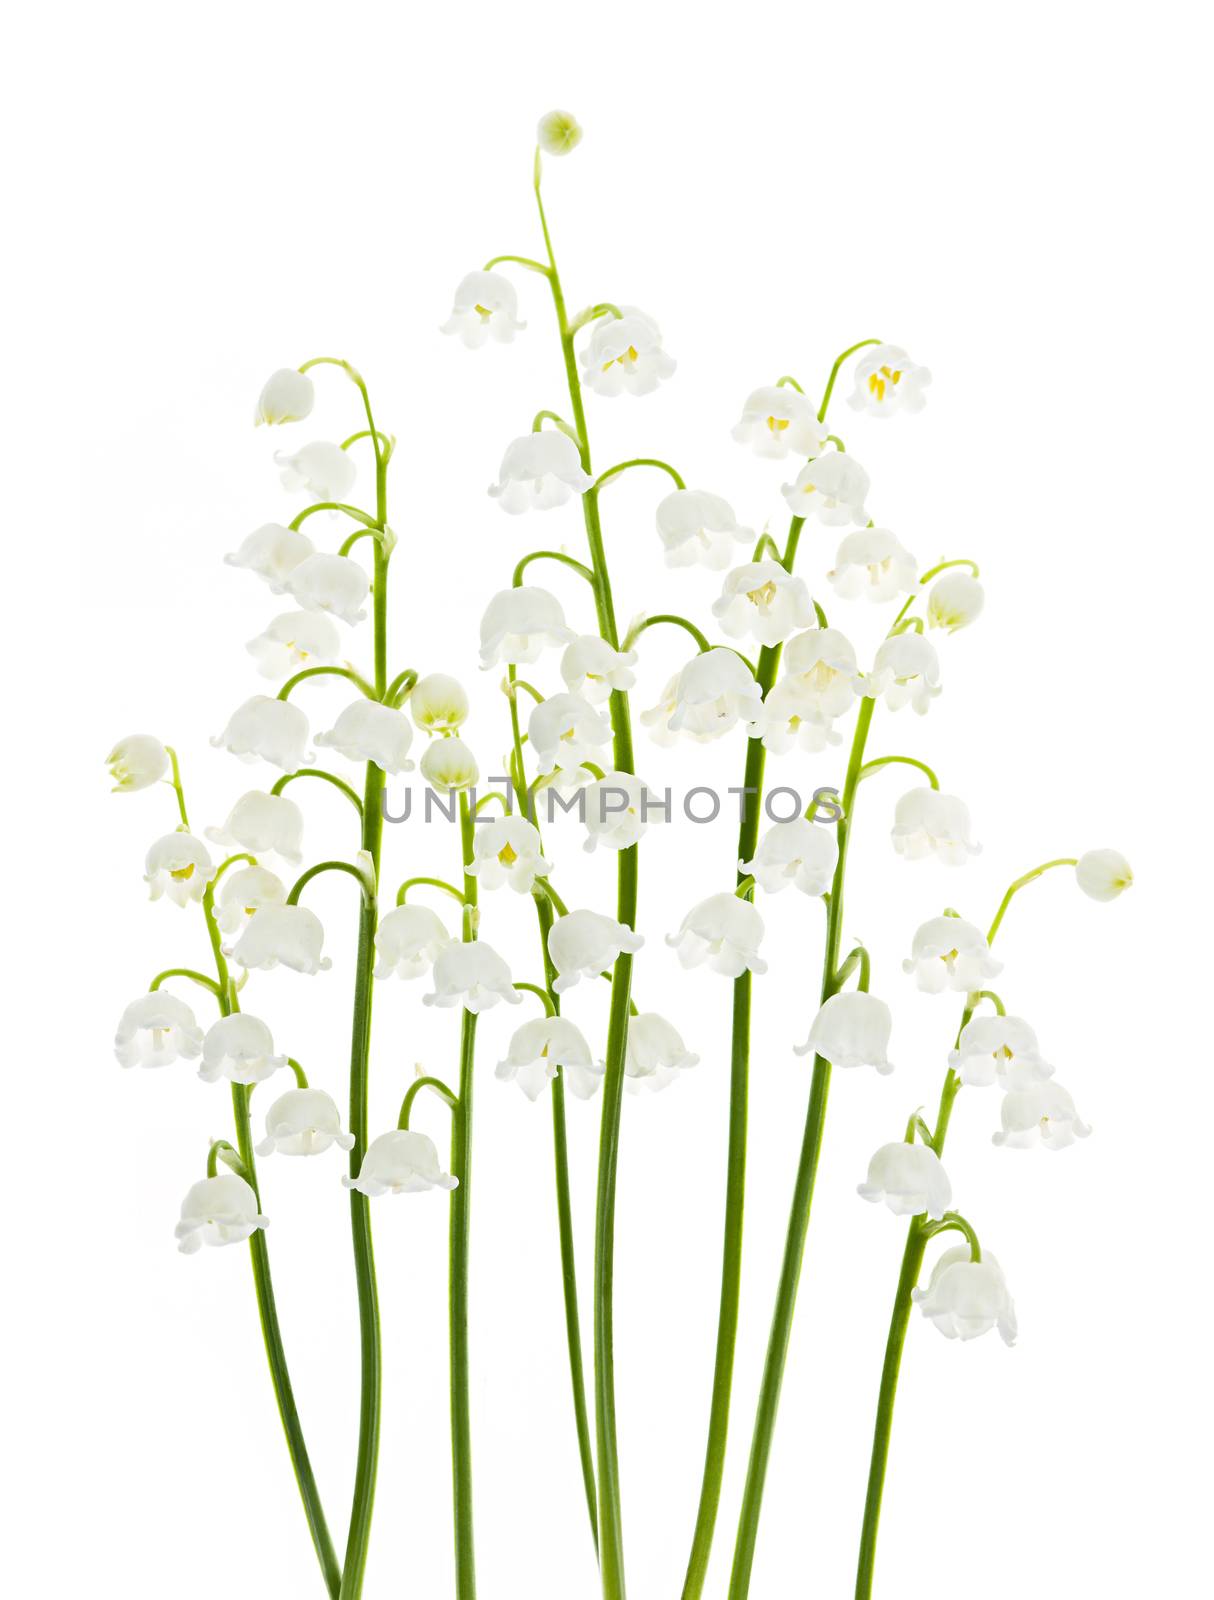 Lily-of-the-valley flowers on white by elenathewise